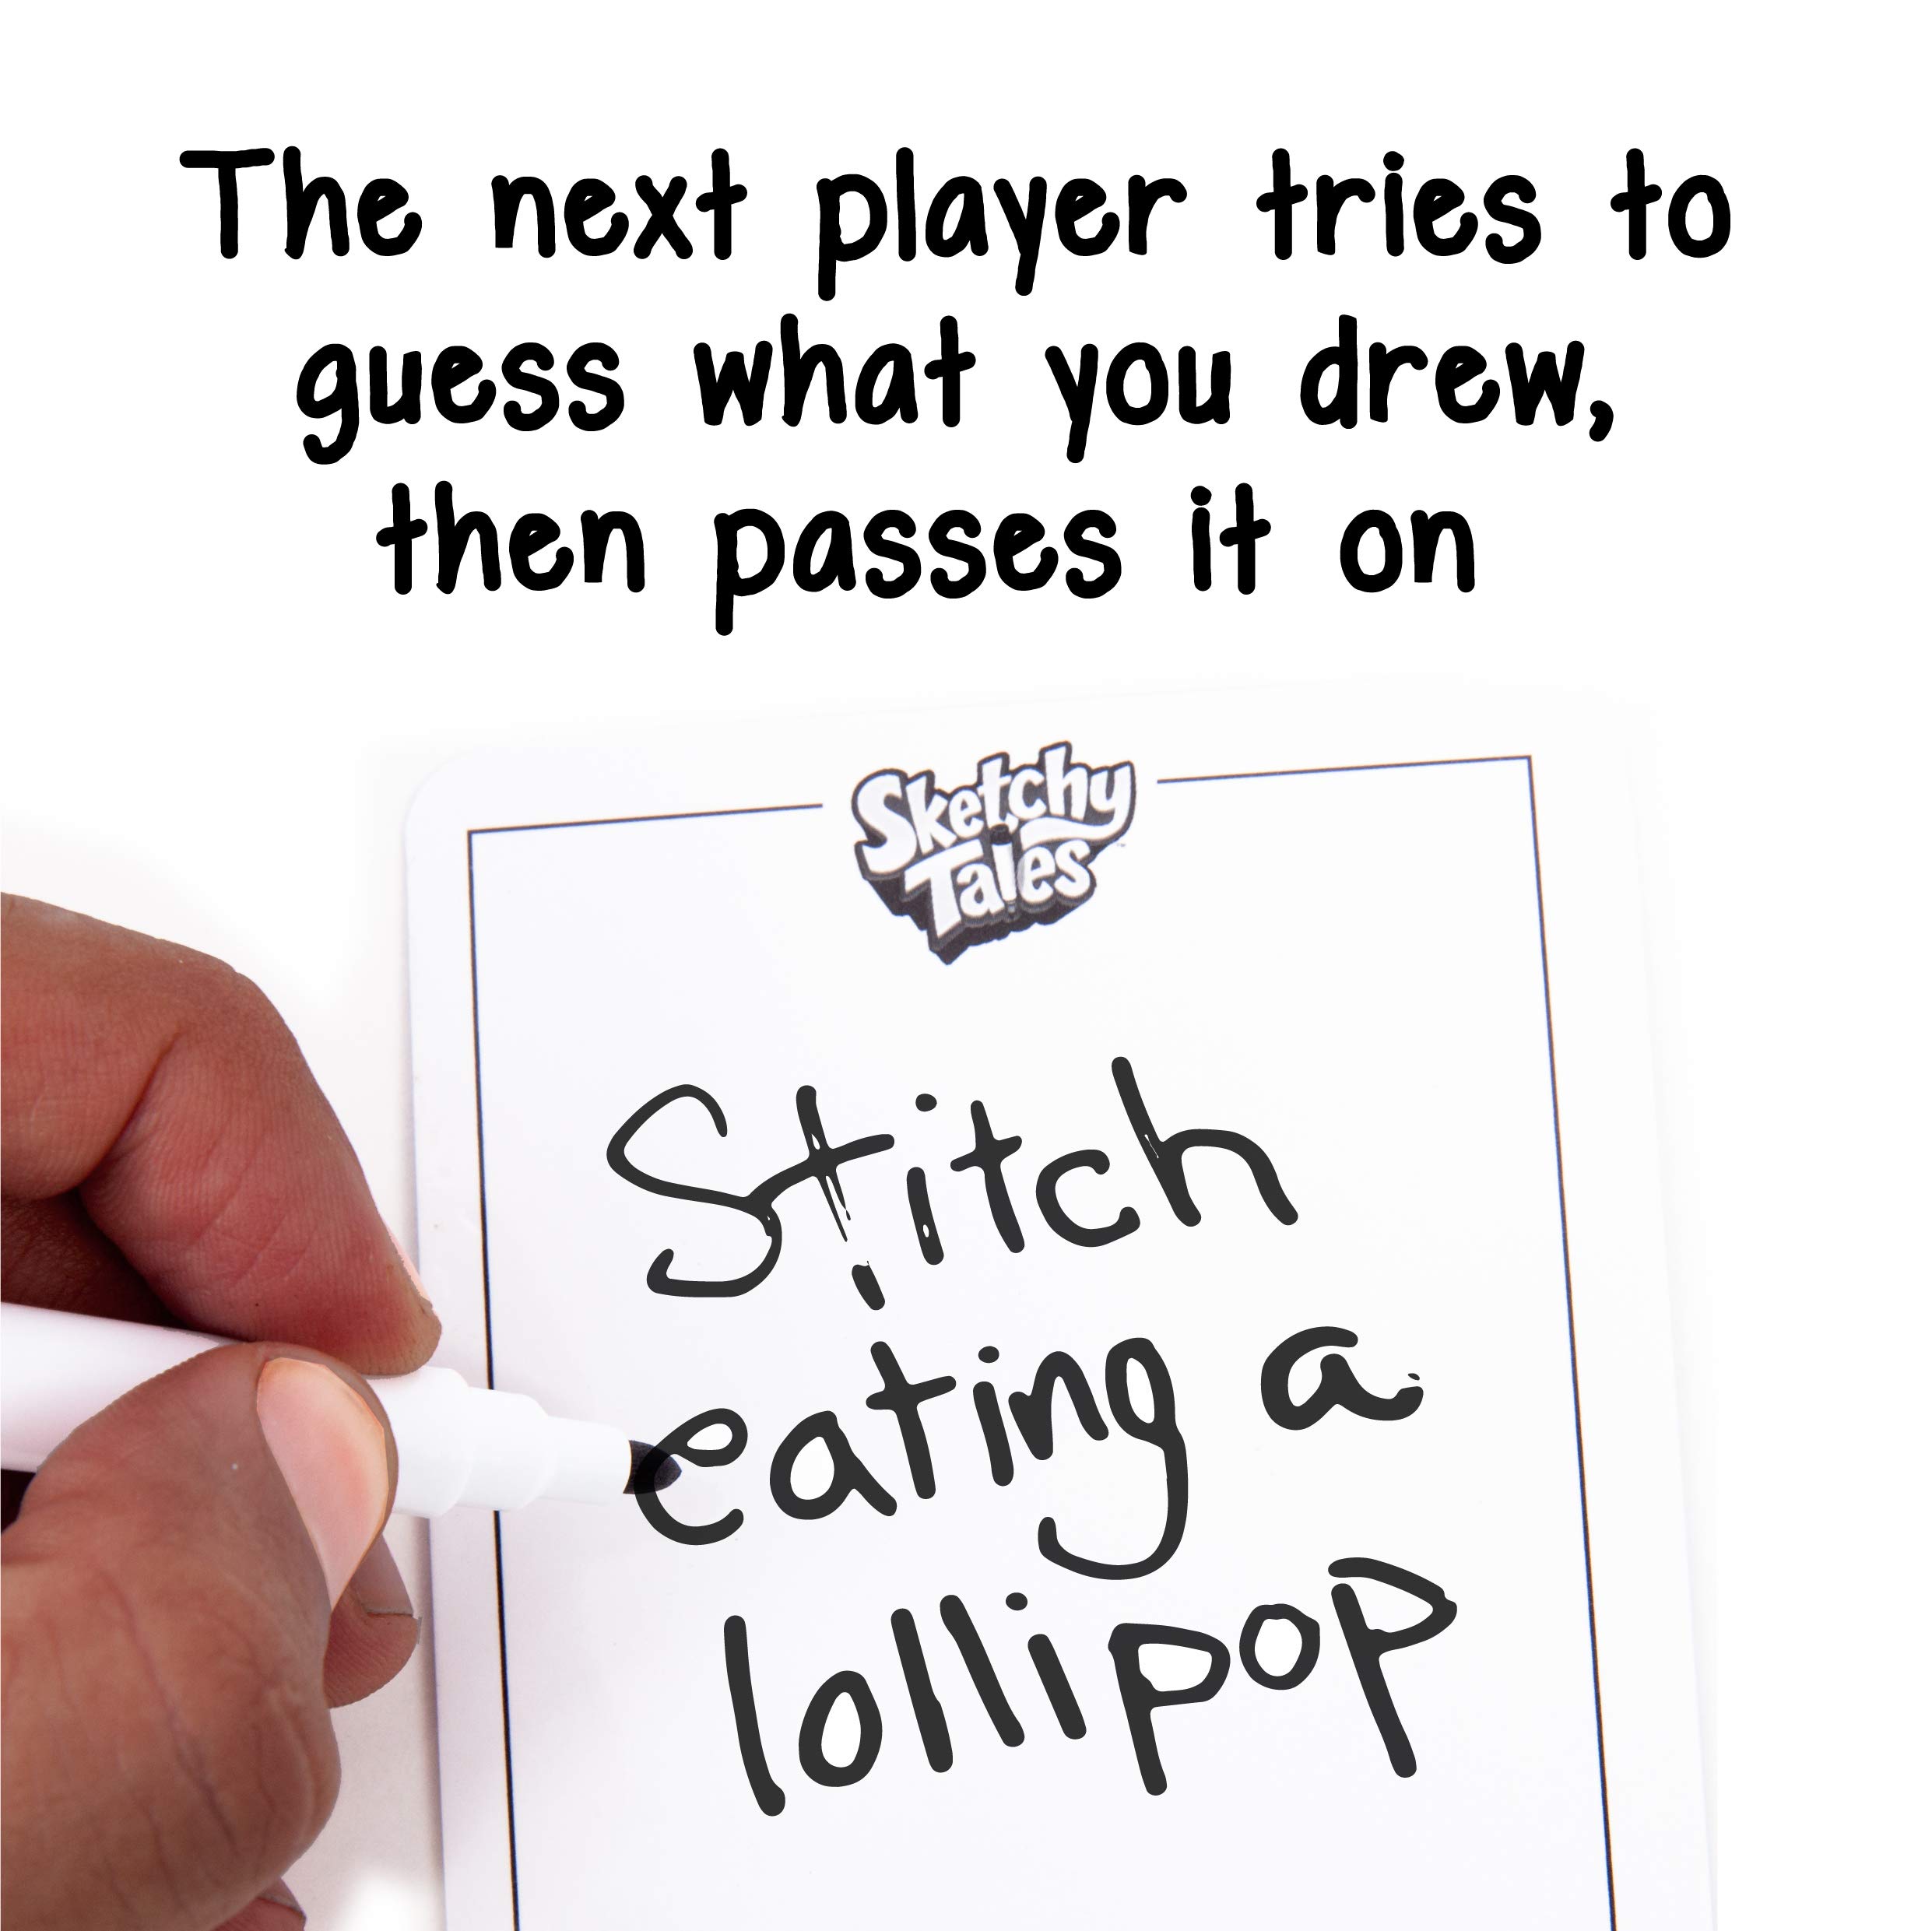 Disney Sketchy Tales: The Magical Disney Drawing Game for Kids